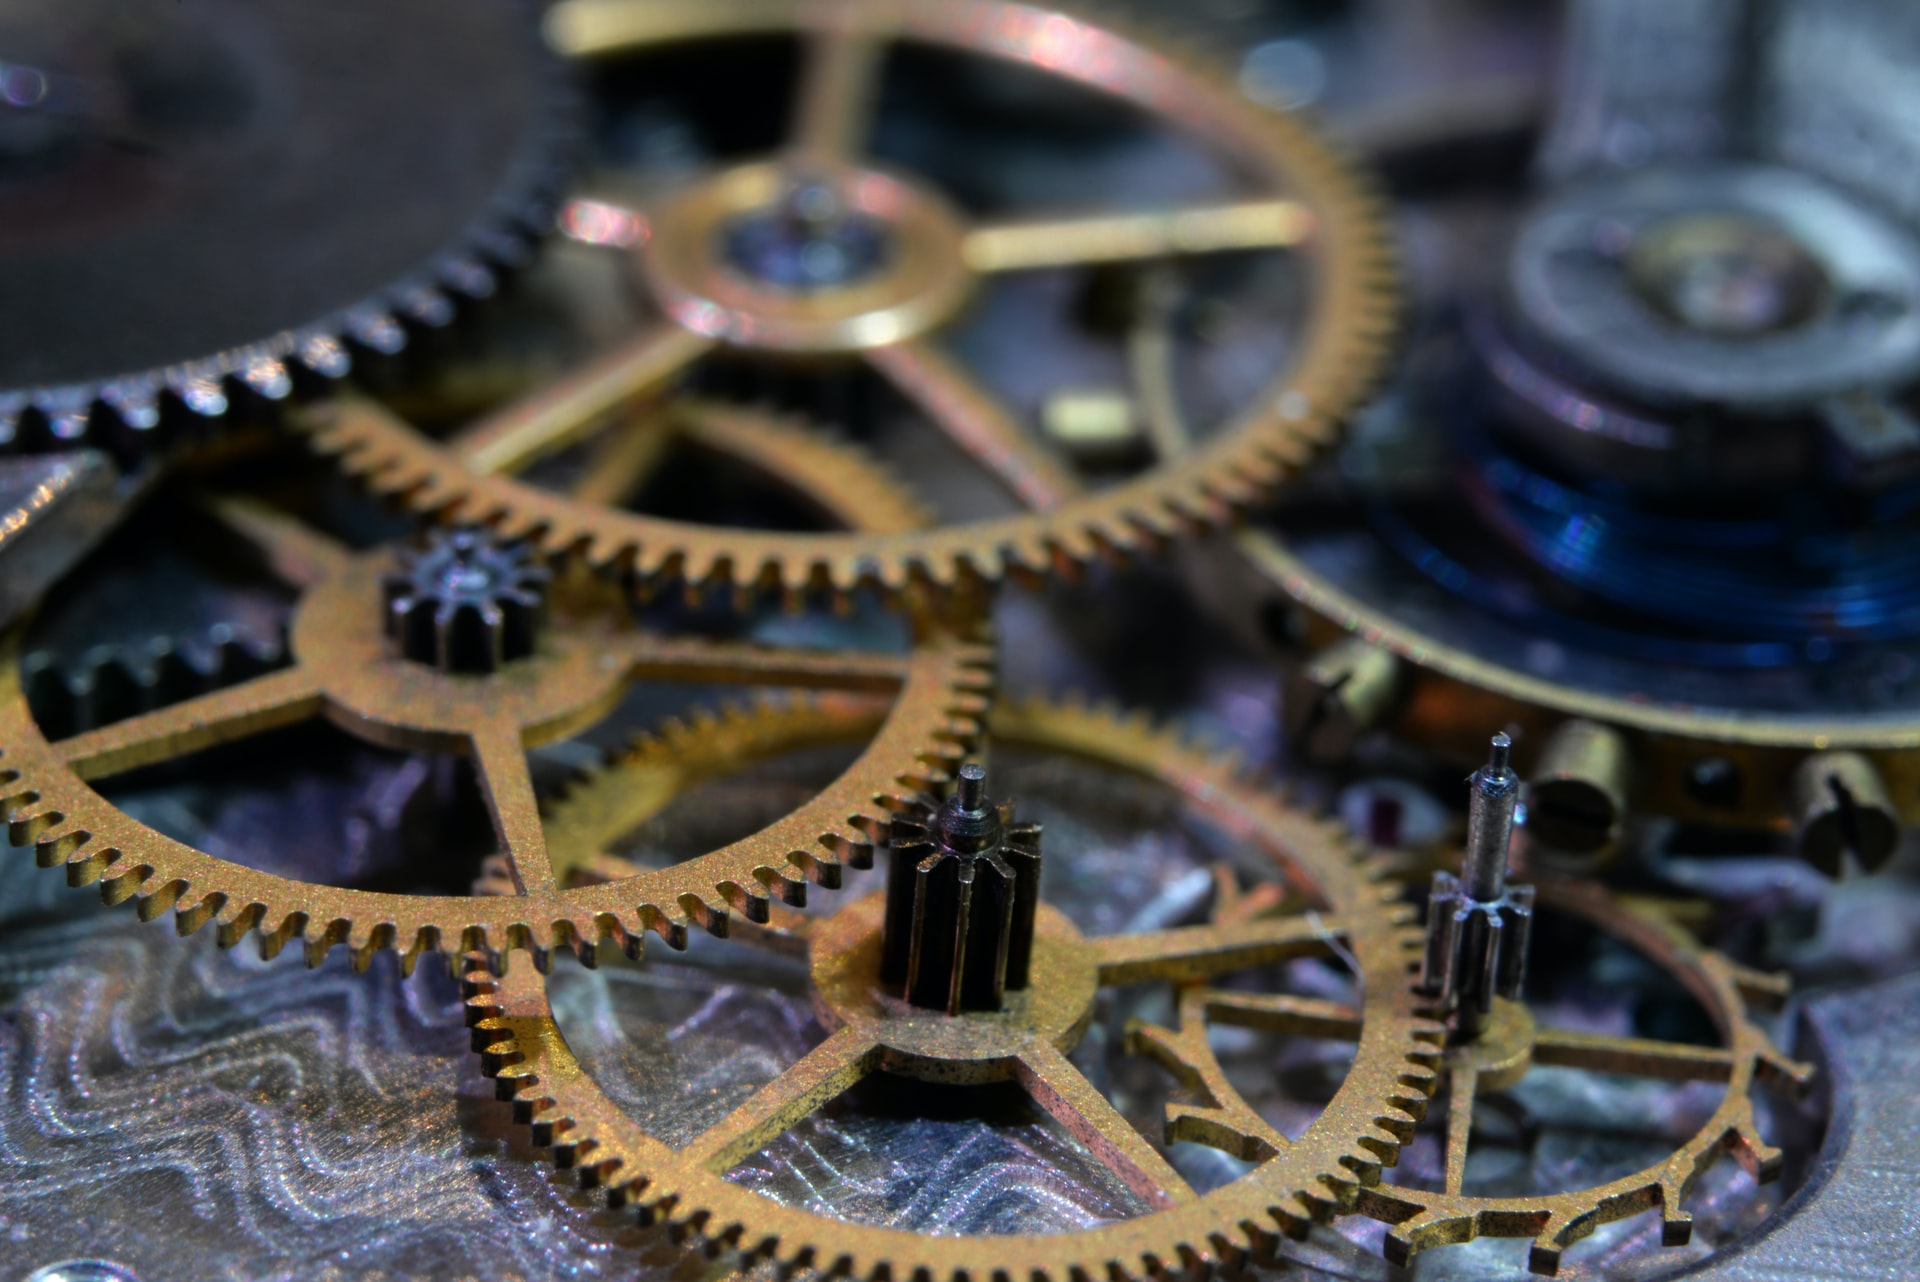 A photo of some gears, a metaphor to how the Python standard module `dis` works and the fact that it allows us to disassemble Python code, letting us understand how Python runs our code under the hood.